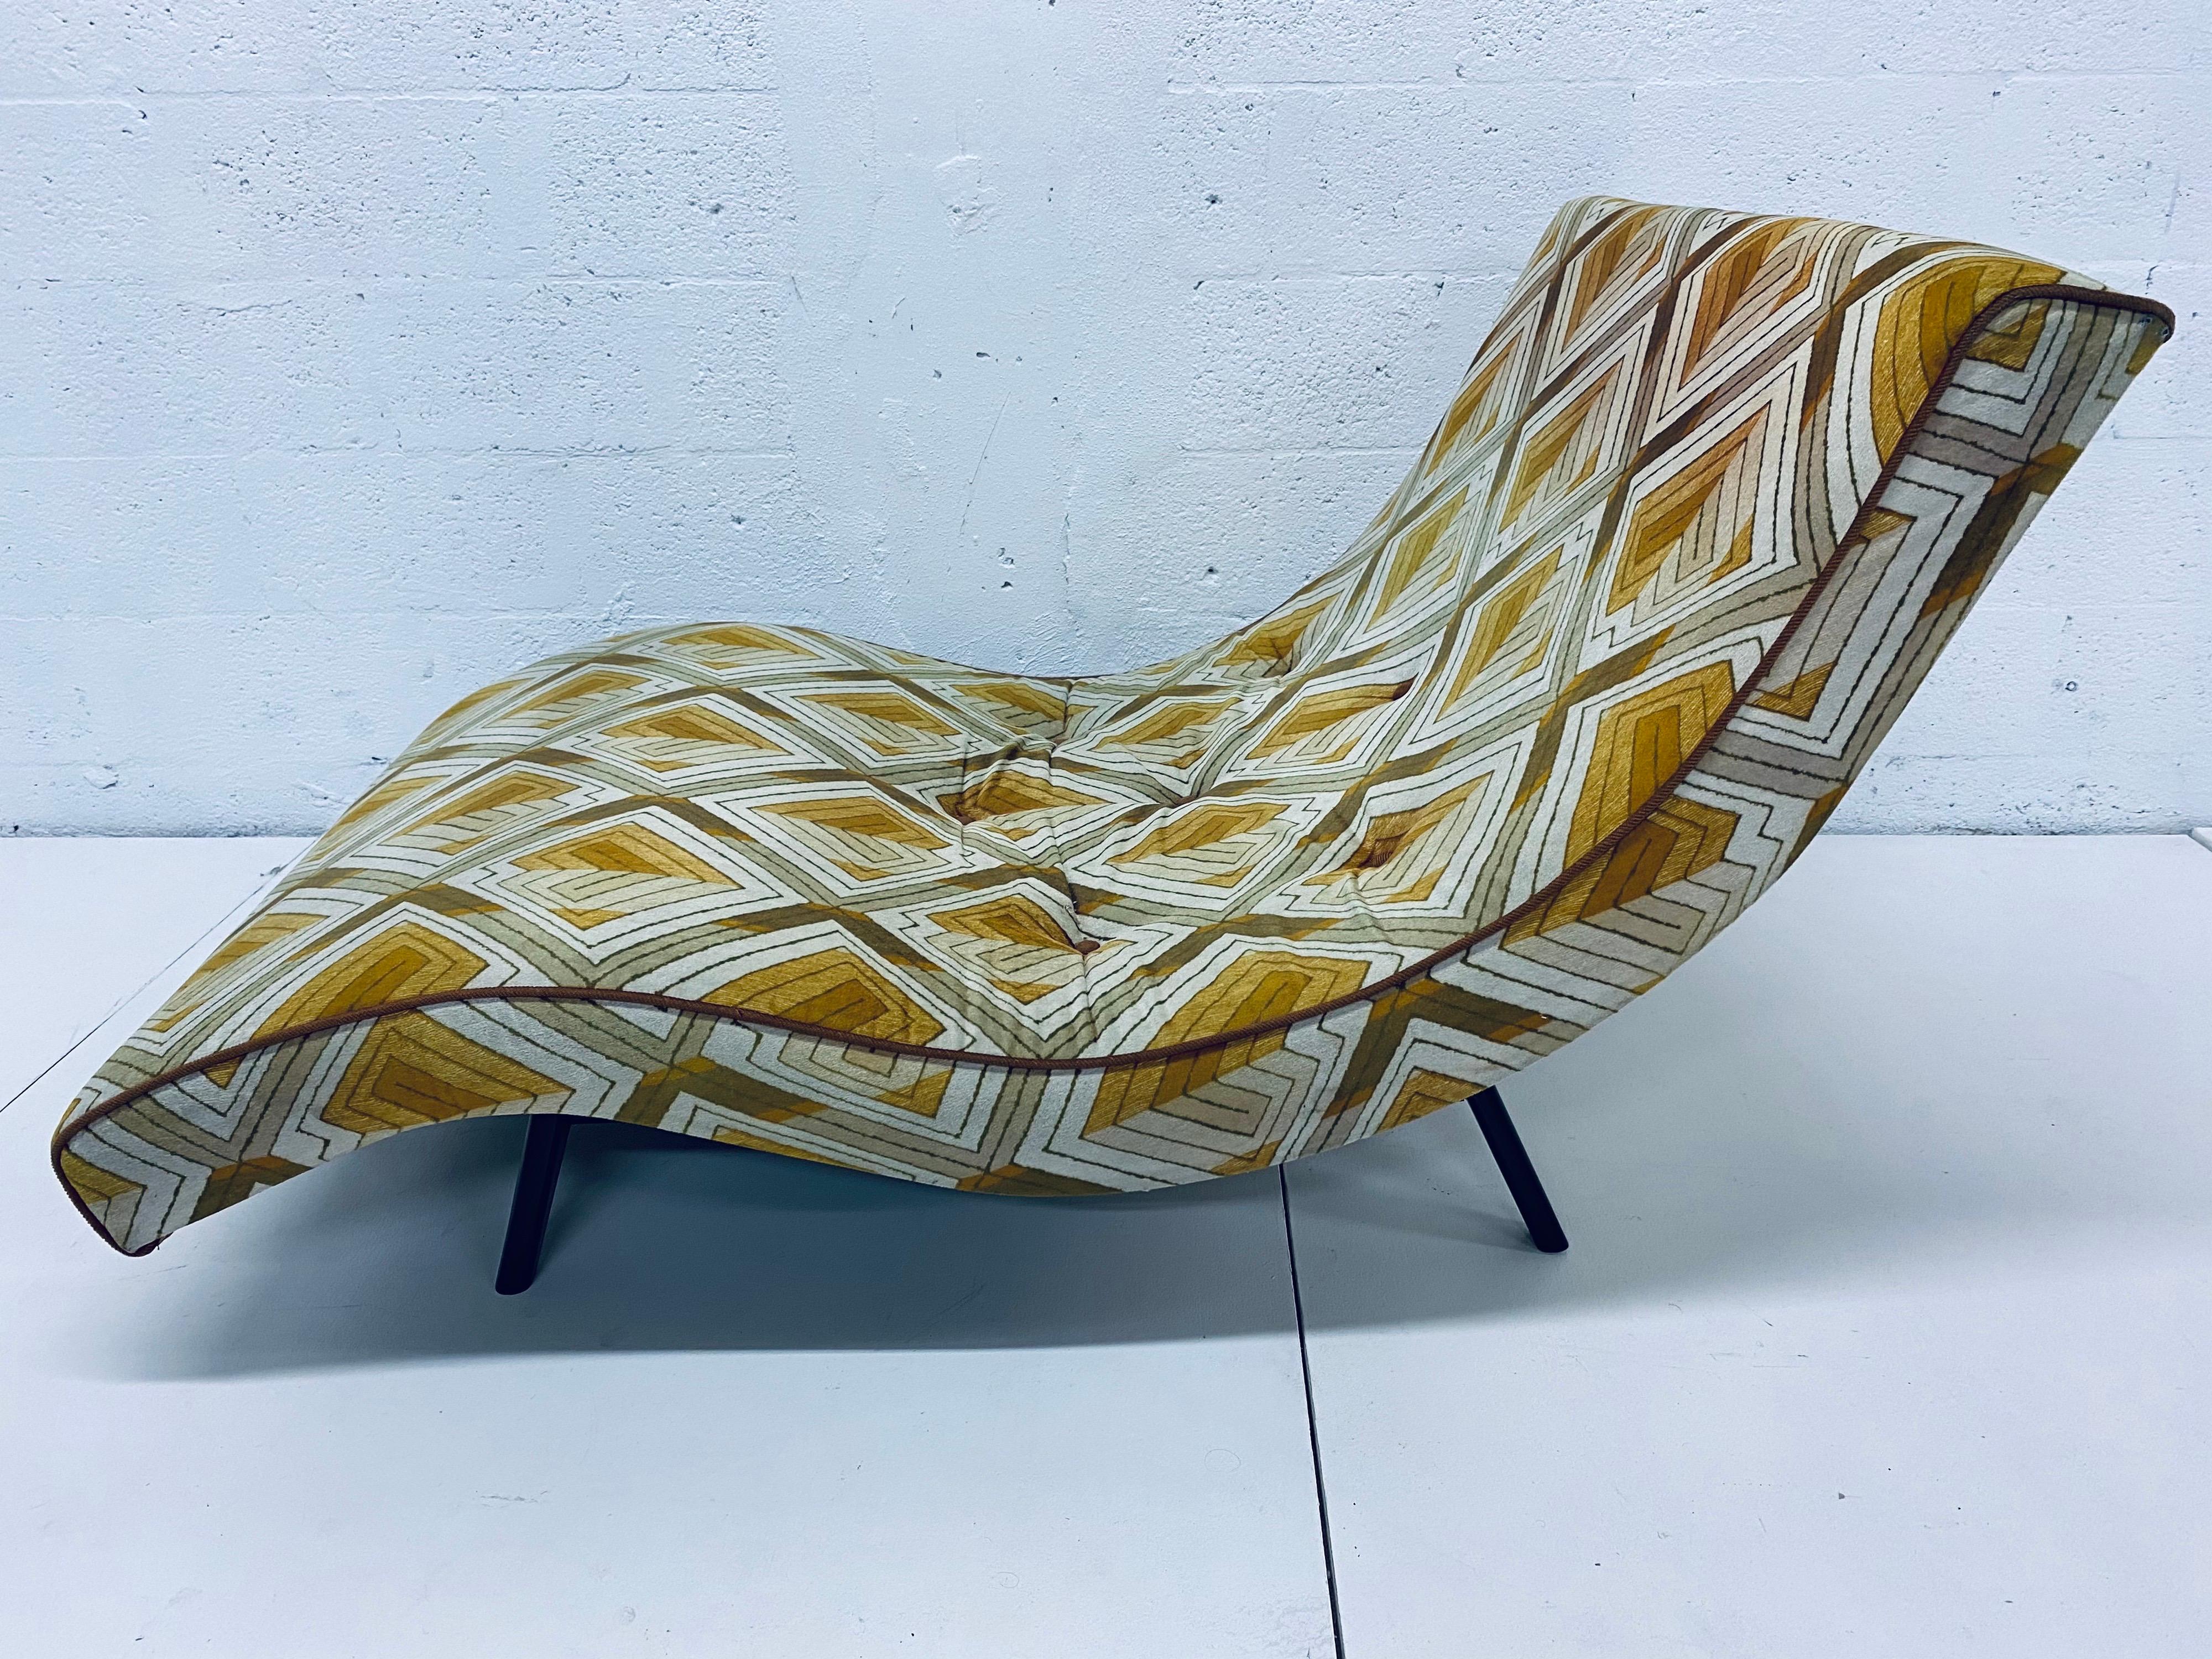 Mid-century 1970s waive chaise lounge with original geometric upholstery by Adrian Pearsall for Craft Associates. The frame has been refinished in an ebony stain. Use as is or have reupholstered.